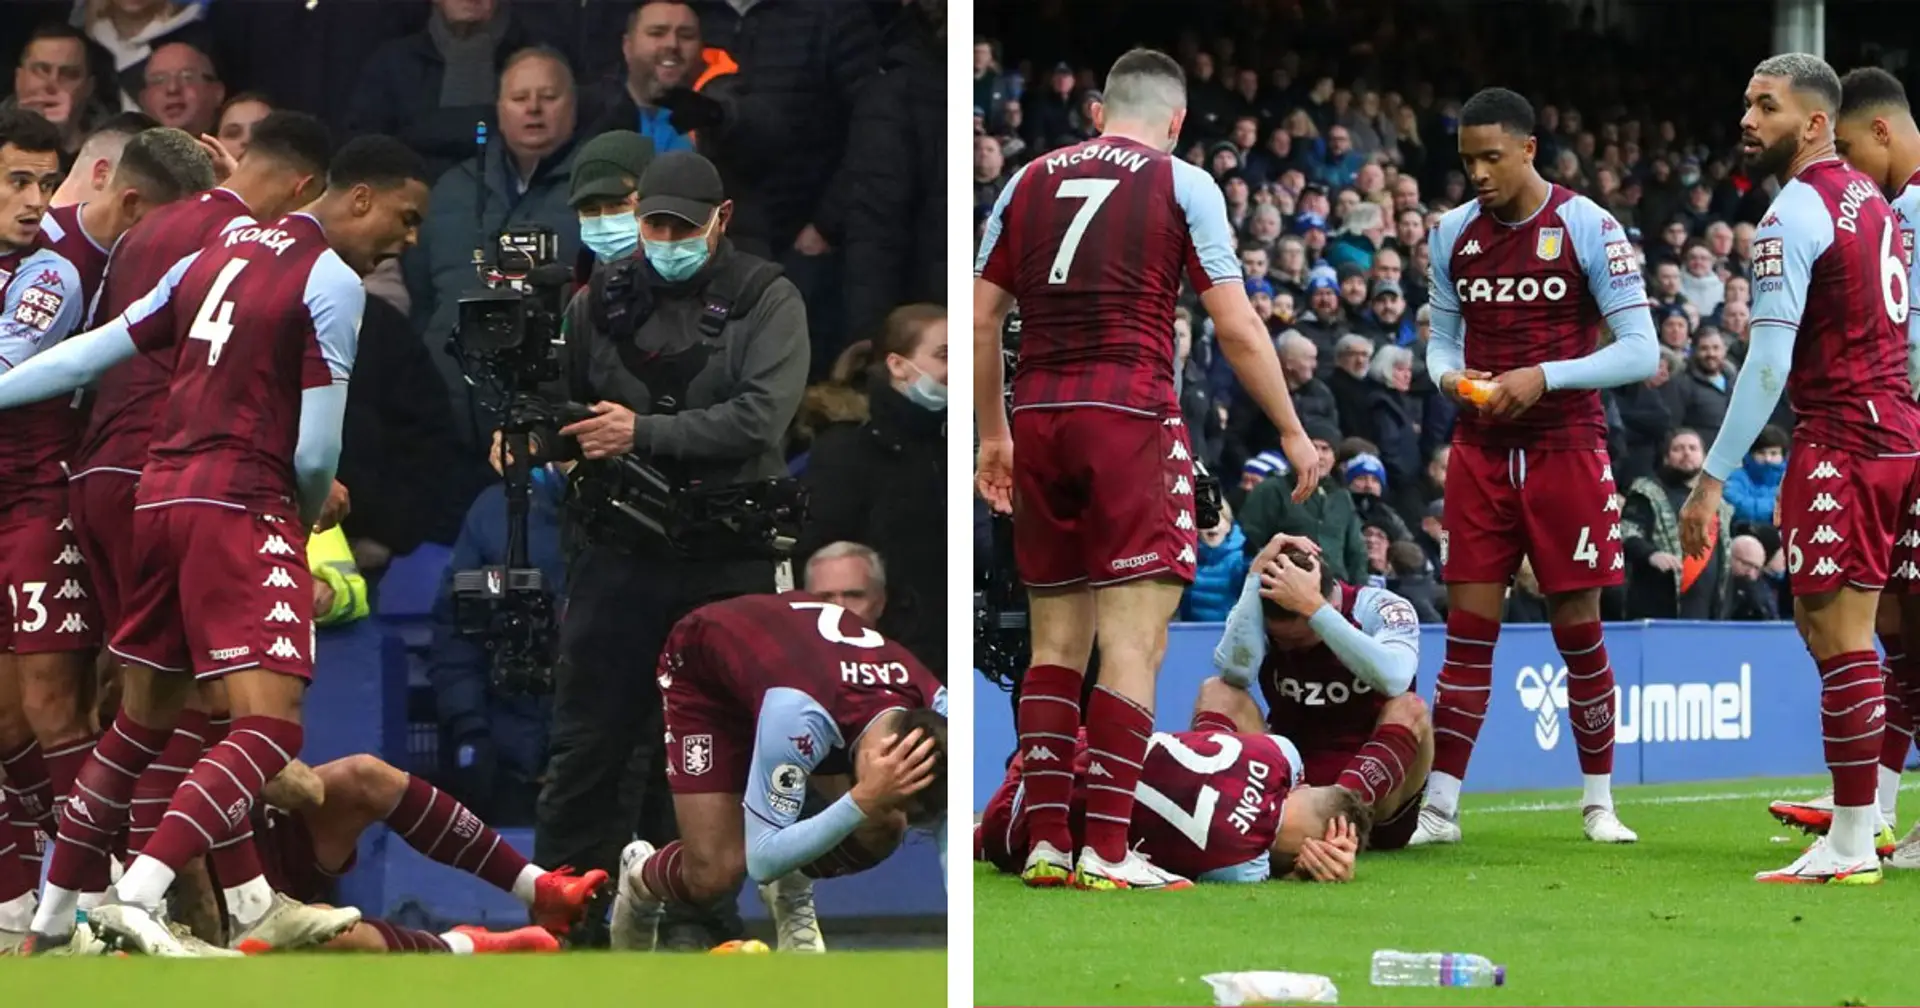 Everton fan arrested after throwing bottle at Aston Villa players during Premier League clash